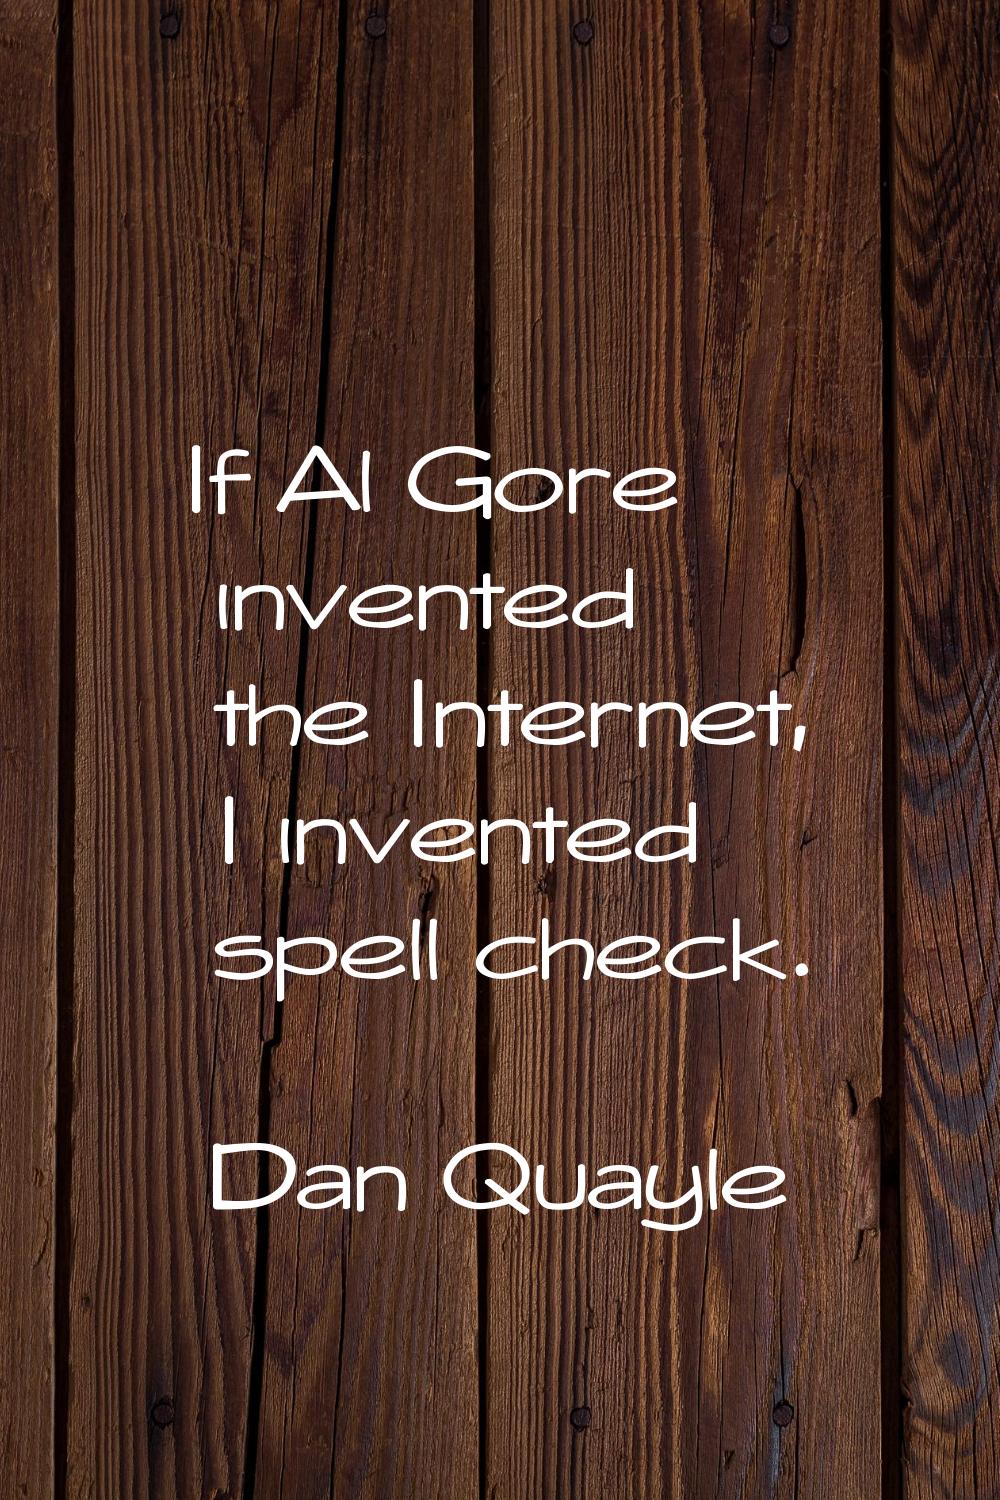 If Al Gore invented the Internet, I invented spell check.